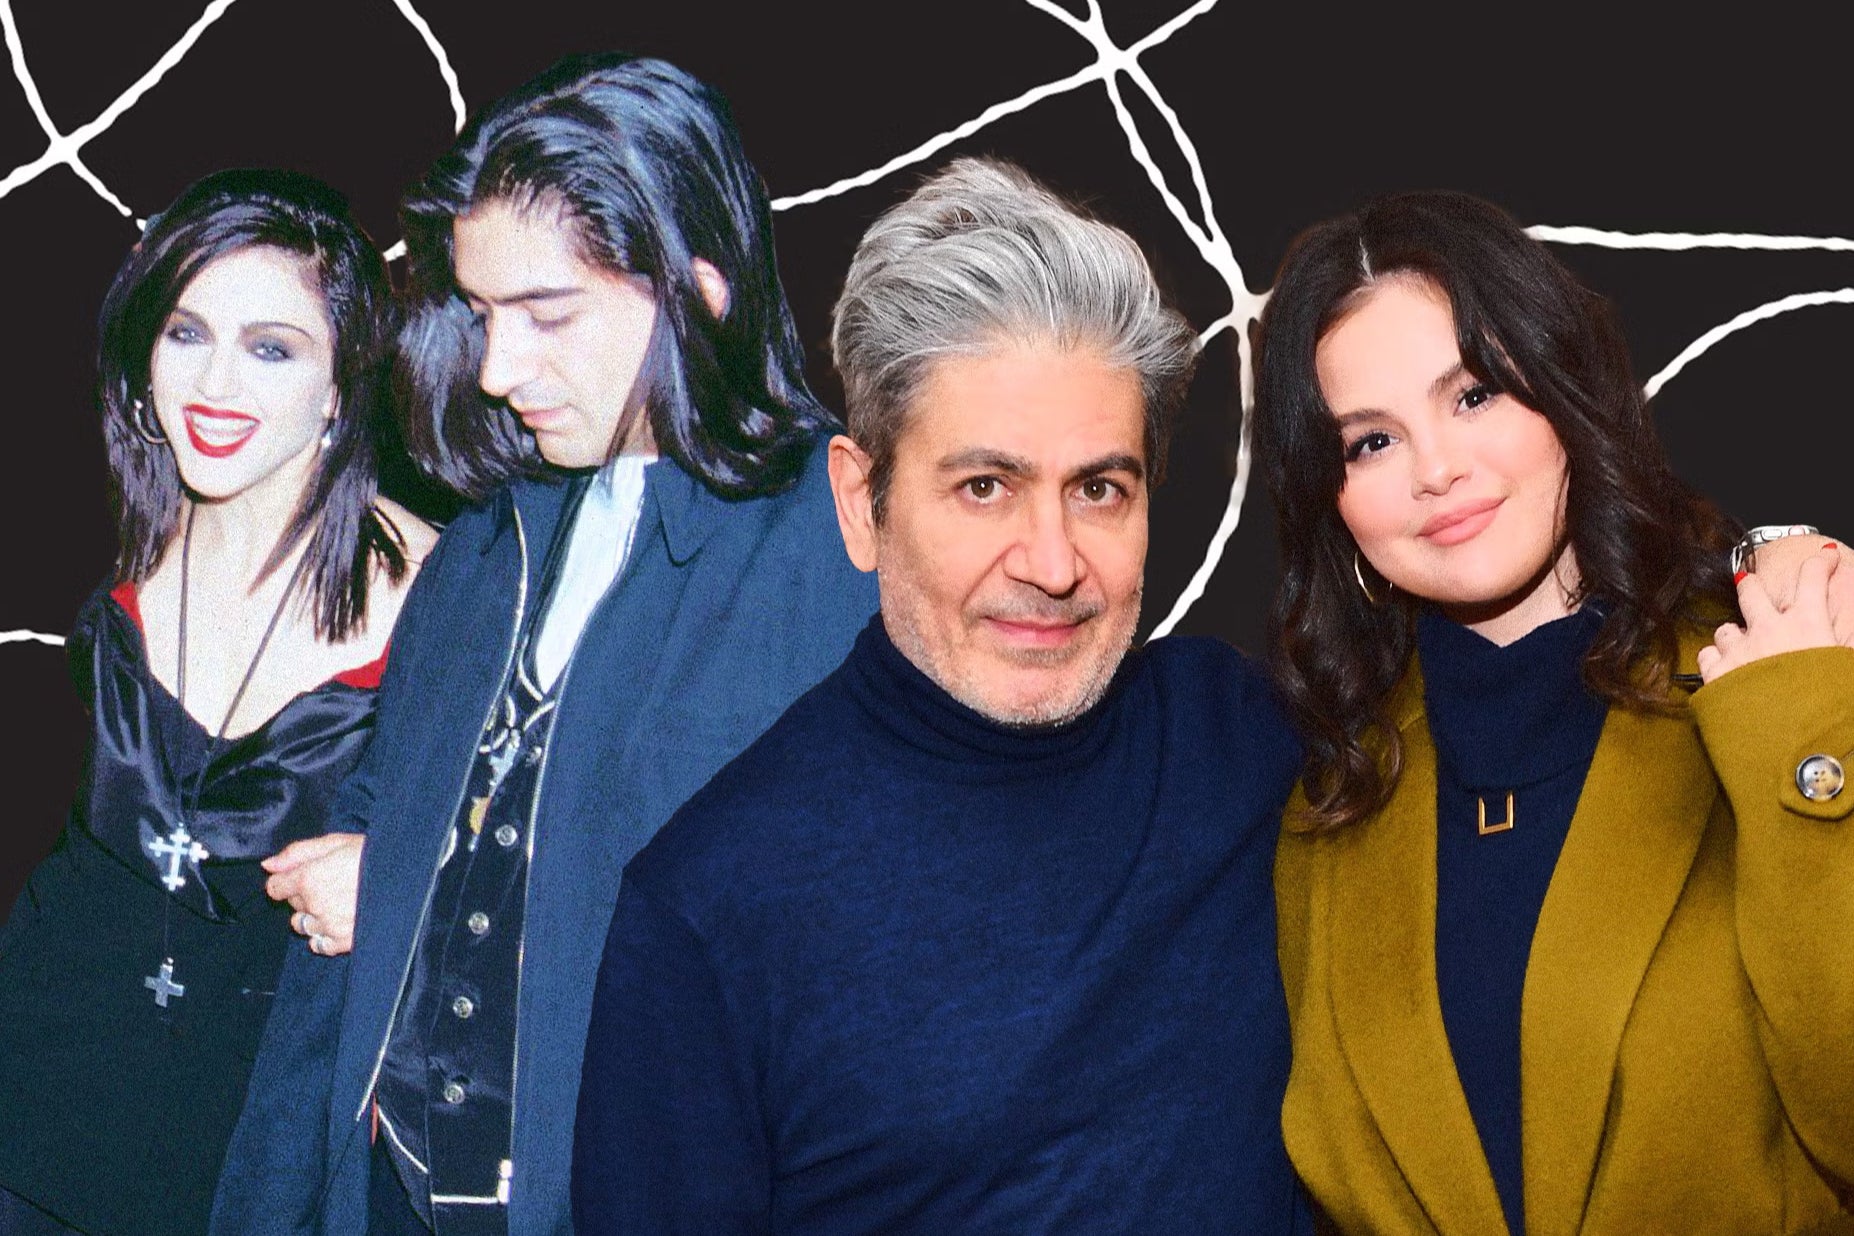 ‘She’s the people’s pop star. She doesn’t seem to have that bravado’: Filmmaker Alek Keshishian with Madonna in 1991 and Selena Gomez in 2022